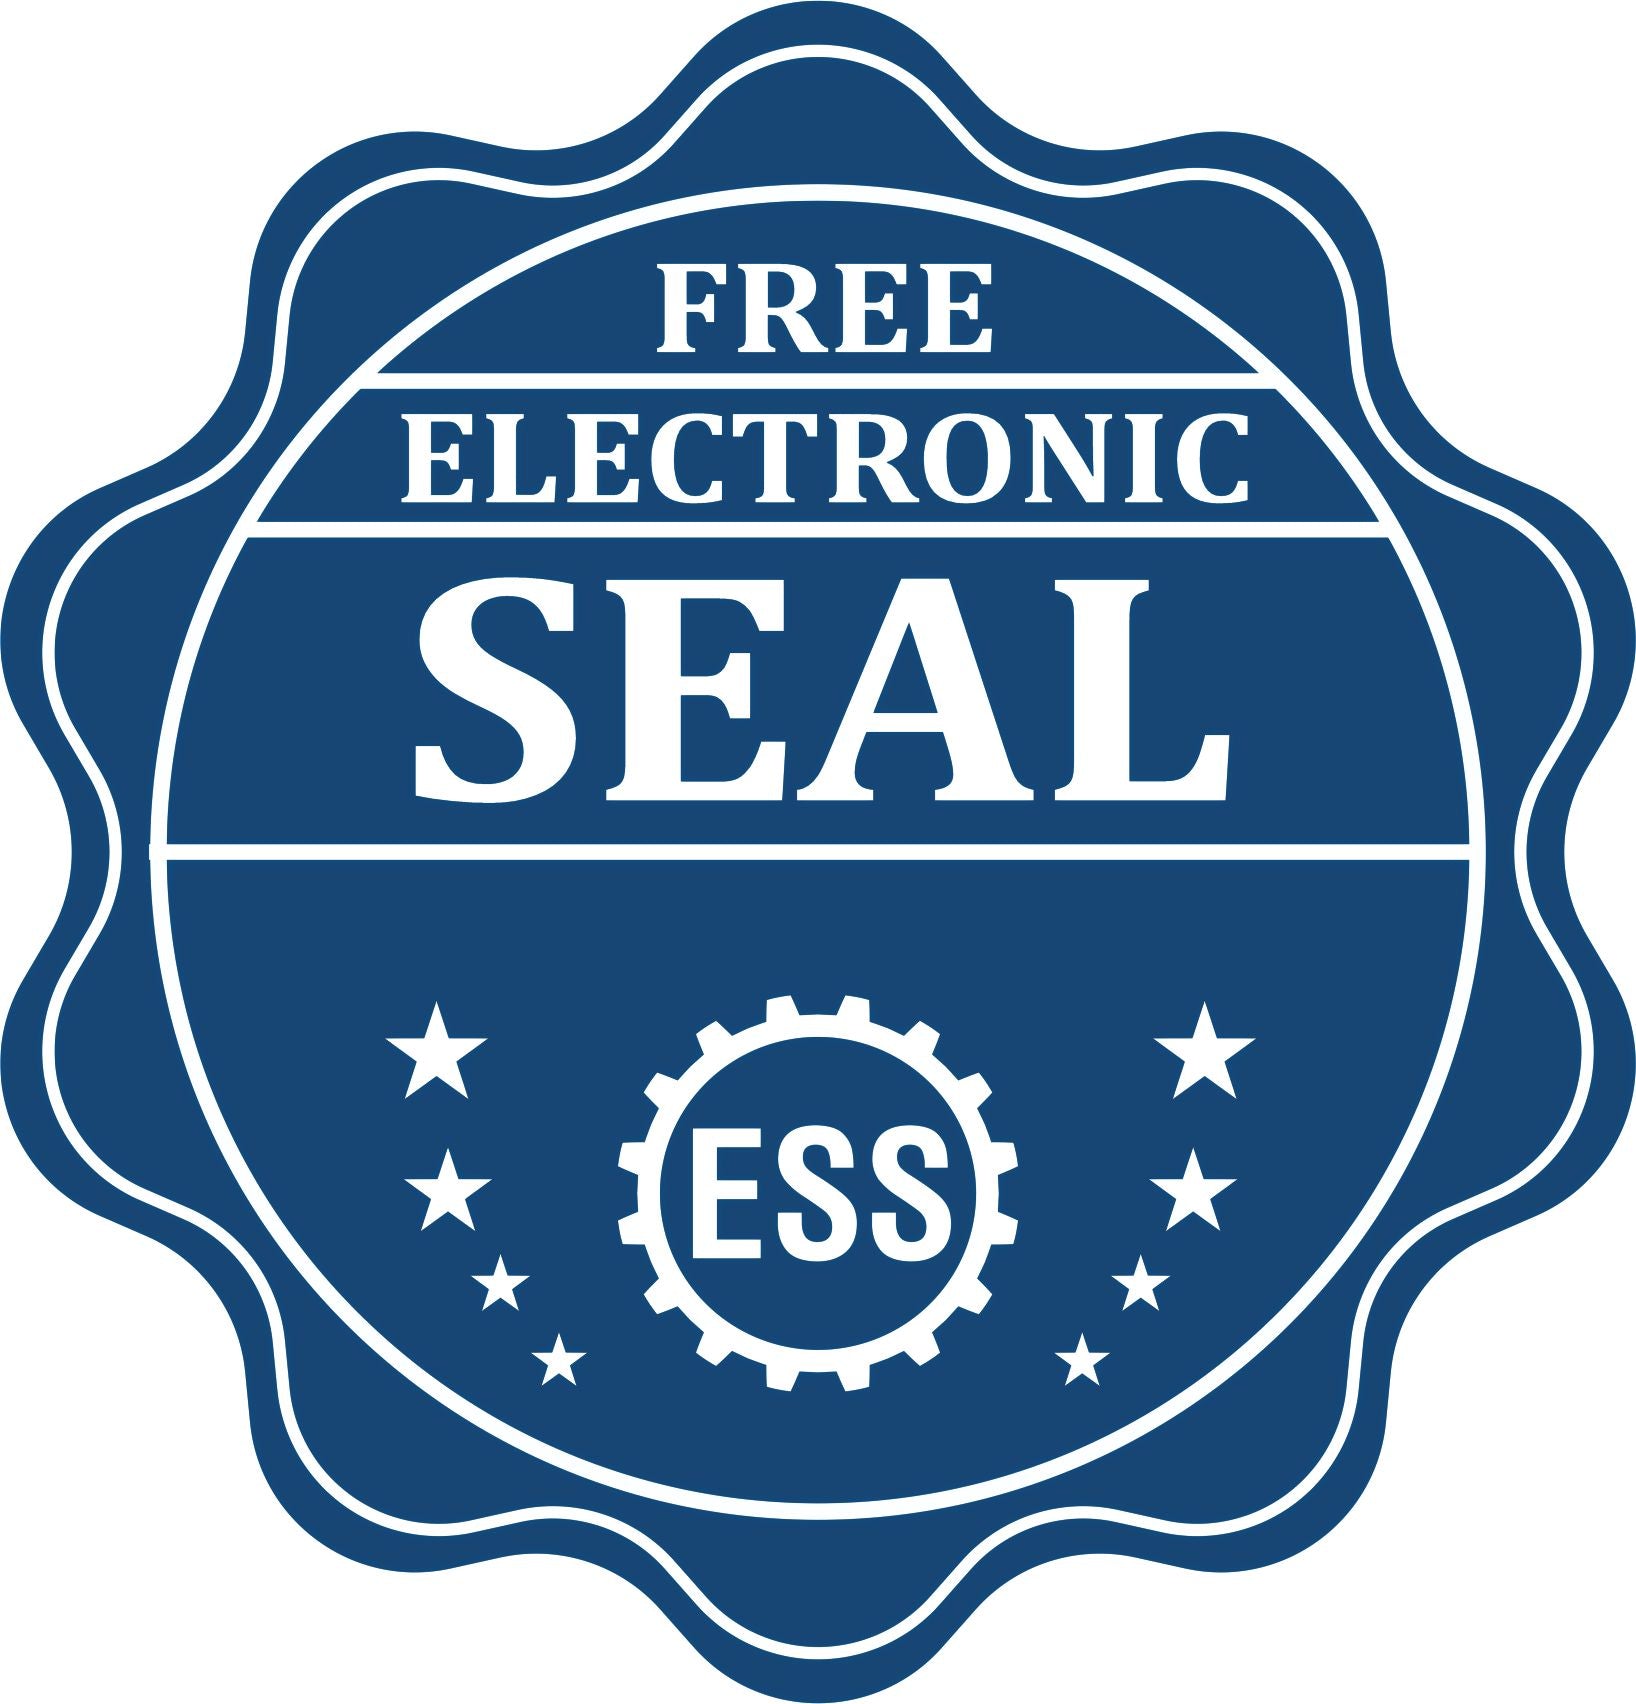 A badge showing a free electronic seal for the Wooden Handle Delaware State Seal Notary Public Stamp with stars and the ESS gear on the emblem.